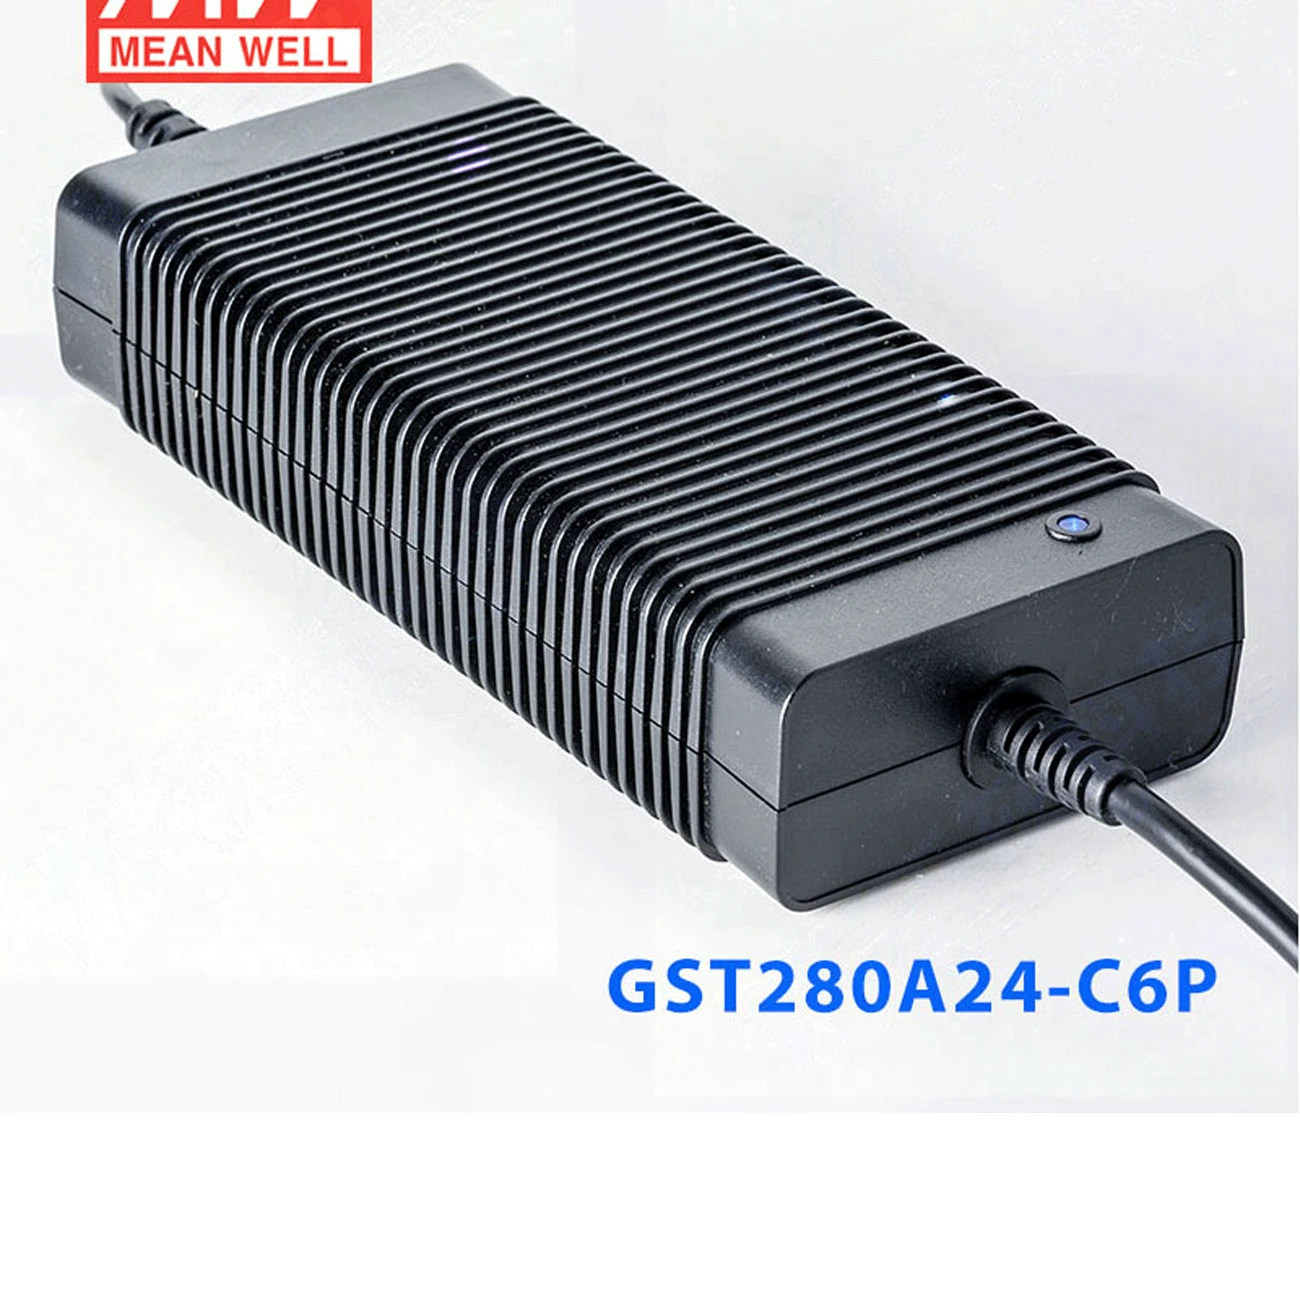 

patriotic MEAN WELL GST280A24-C6P 24V 11.67A meanwell GST280A 24V 280.8W AC-DC High Reliability Industrial Adaptor